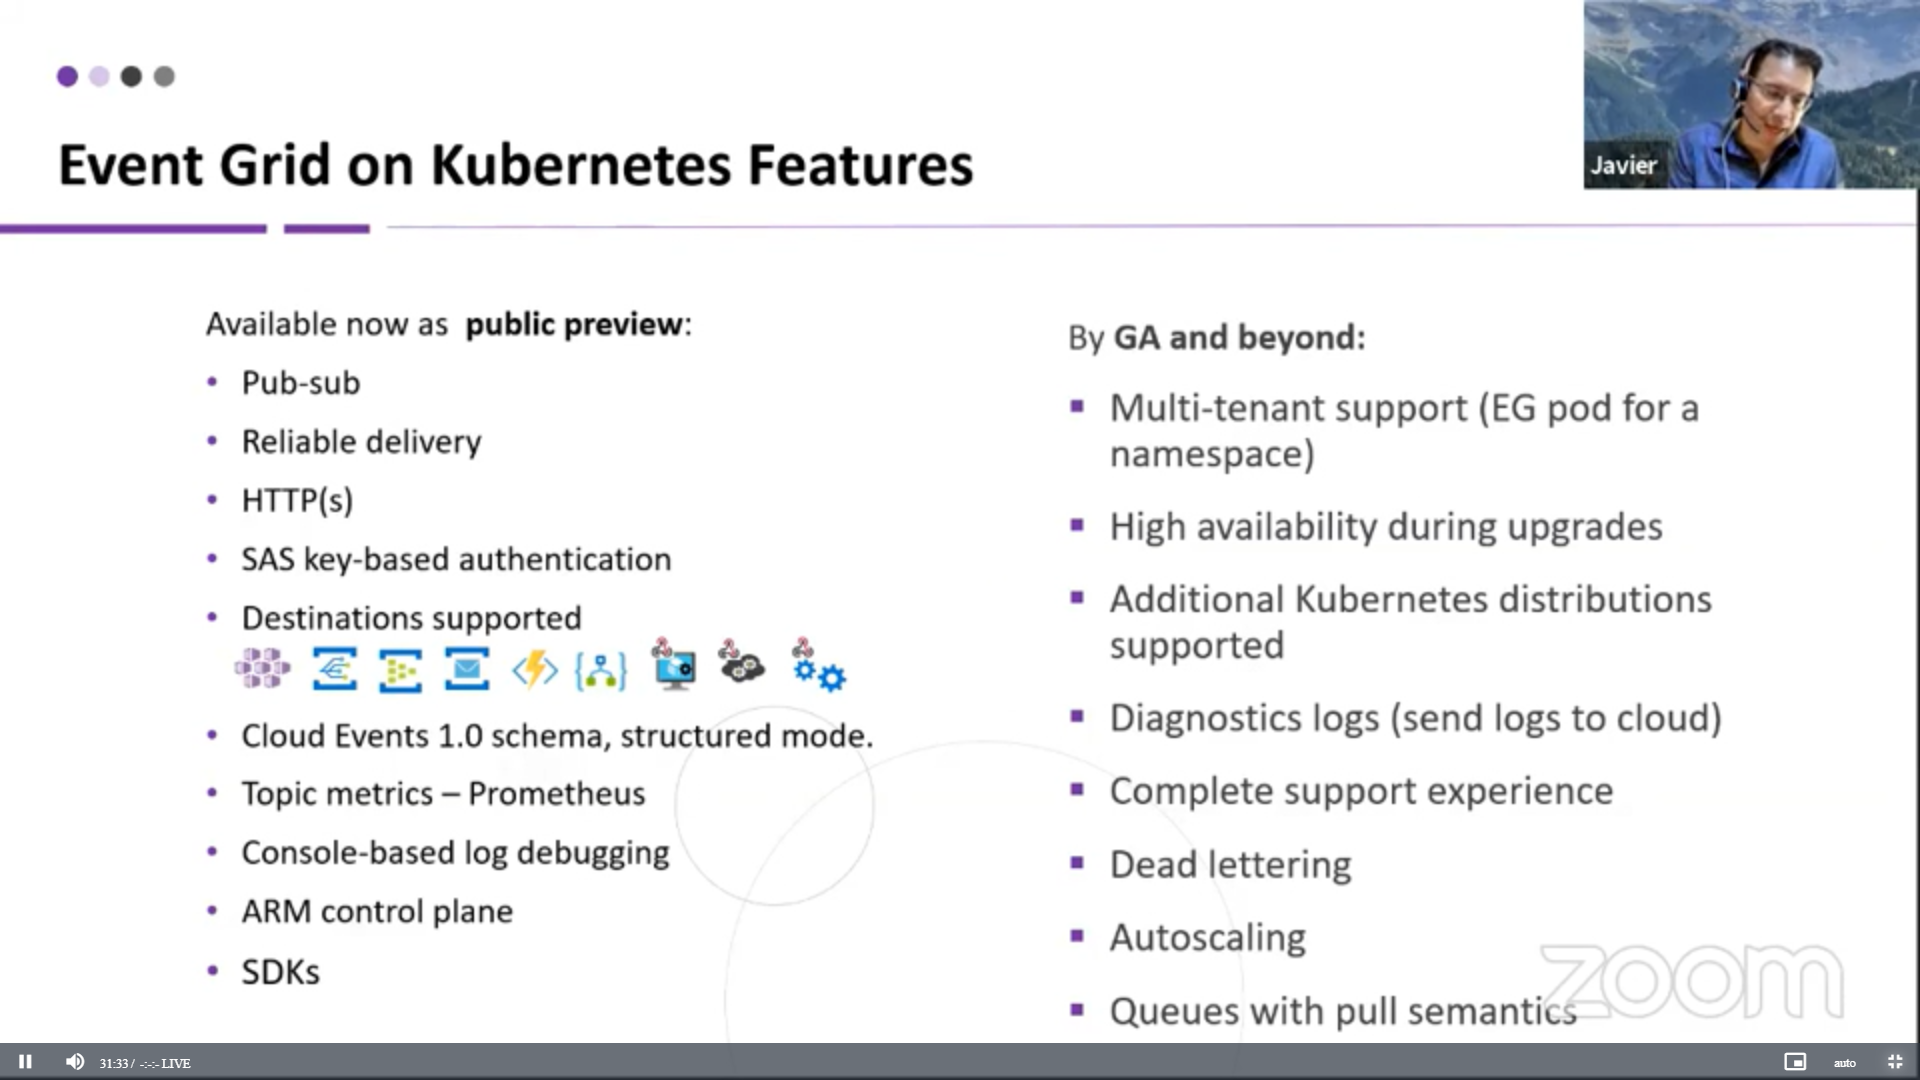 Event Grid on Kubernetes Features